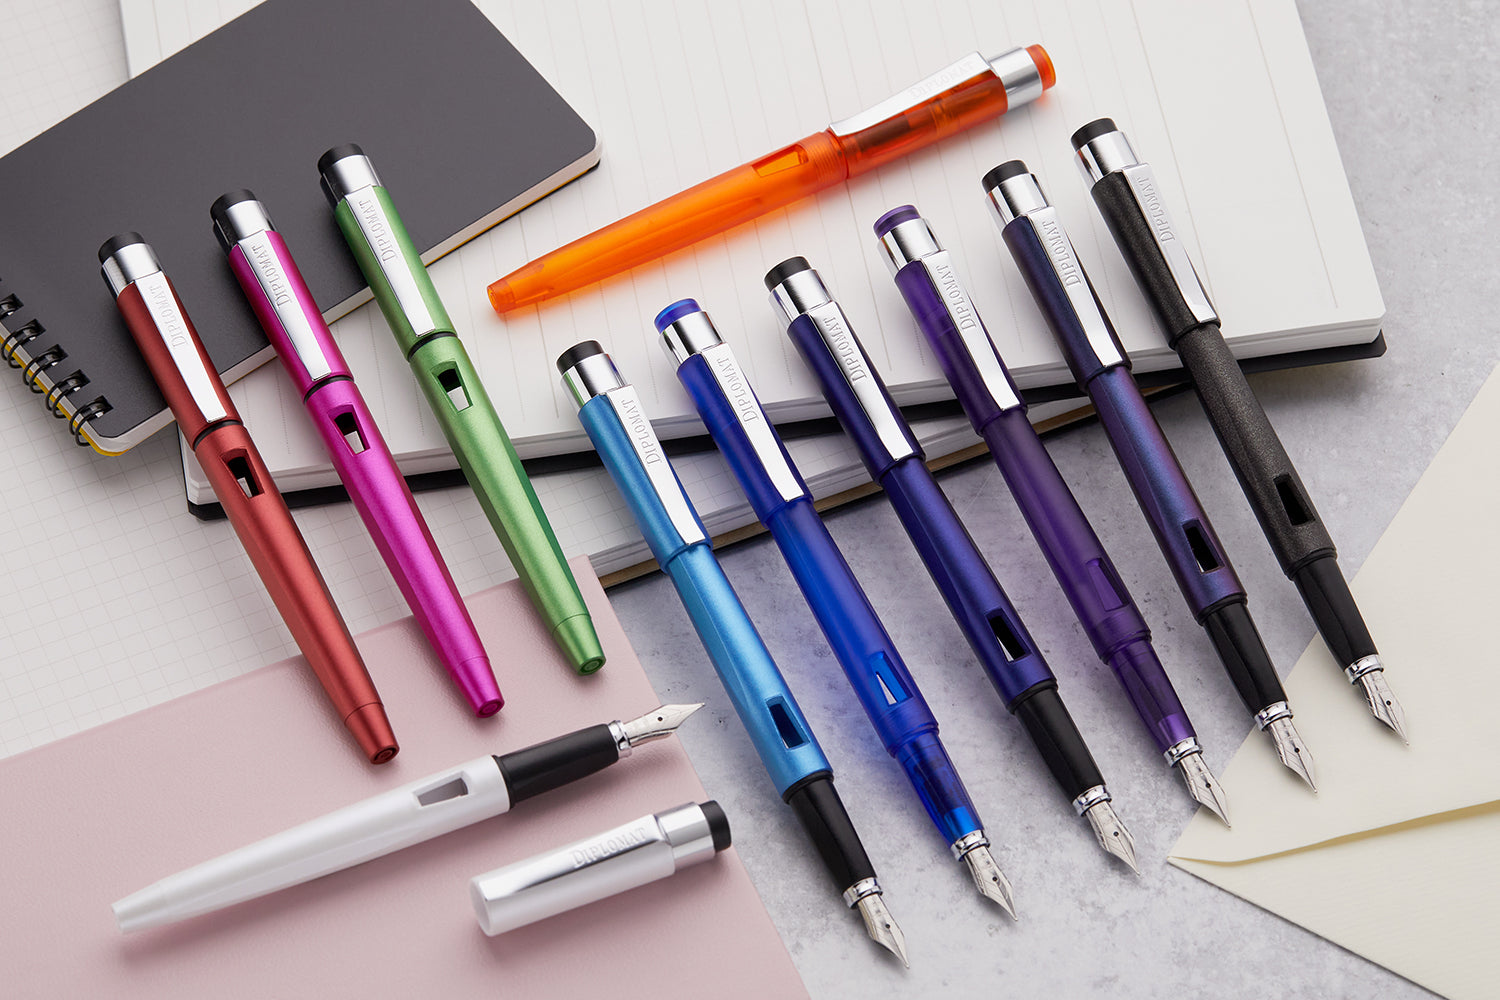 A large group of colorful fountain pens arranged in a row